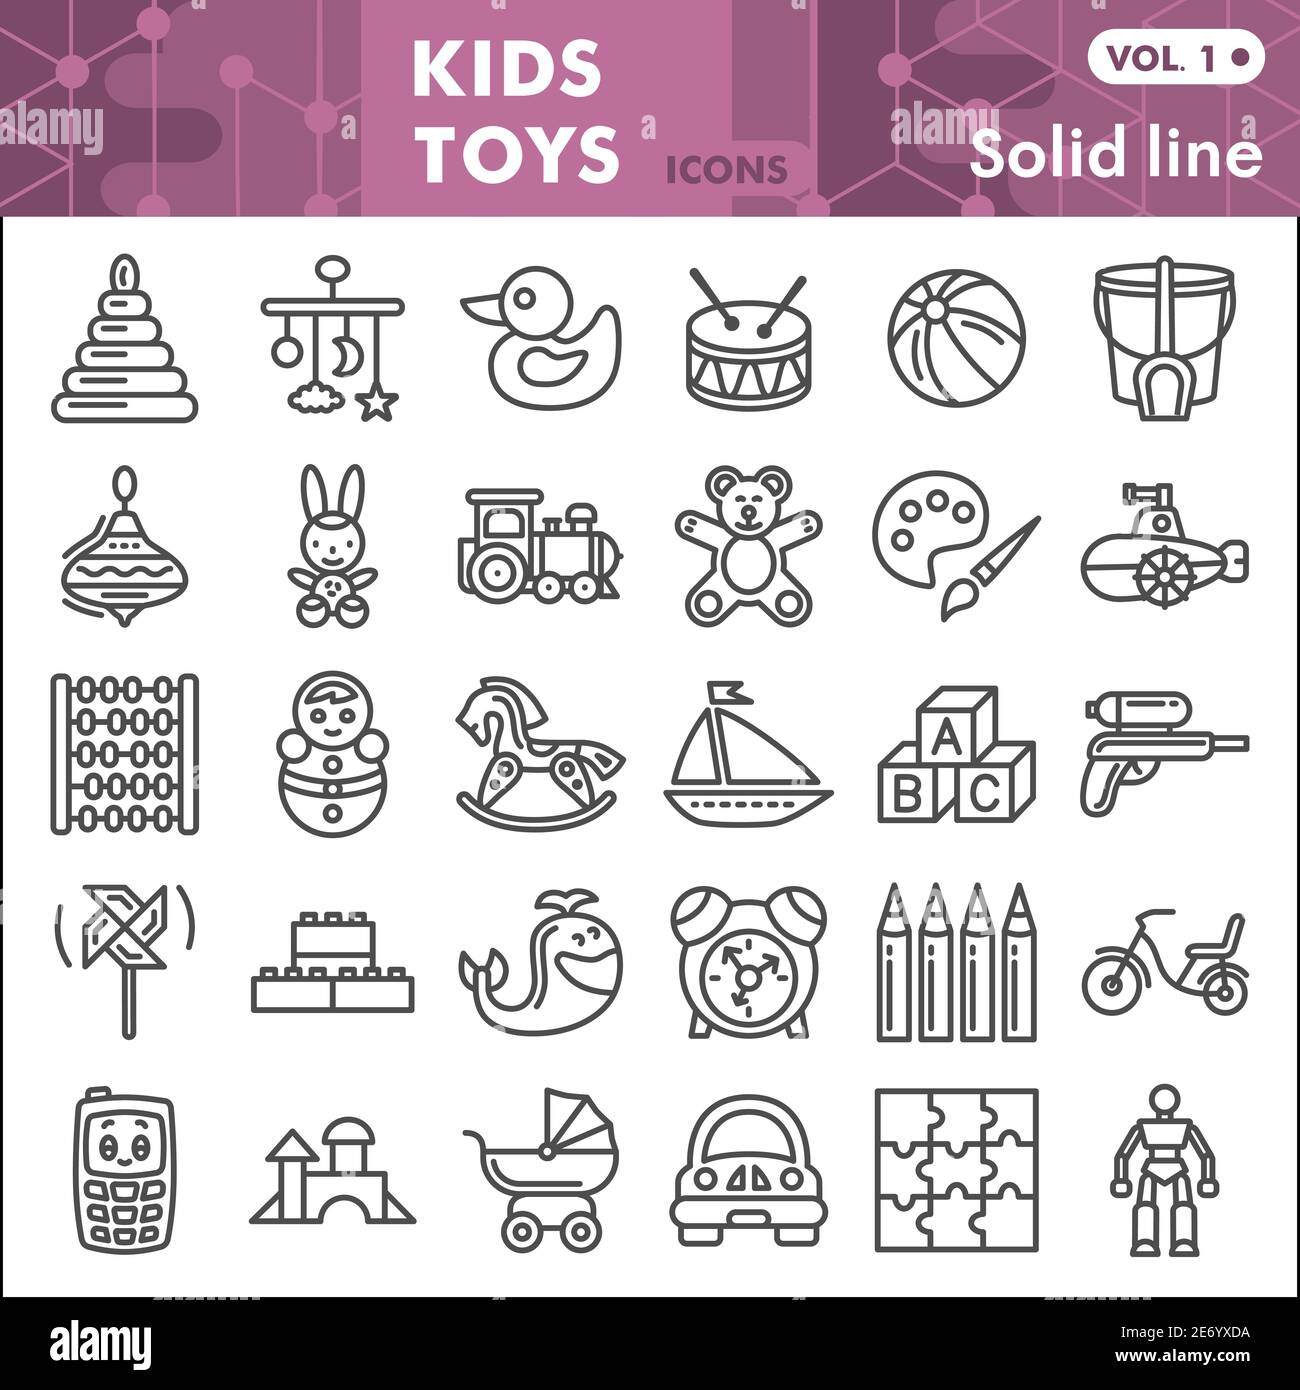 Kids toys line icon set, Children toys symbols collection or sketches. Baby toy linear style signs for web and app. Vector graphics isolated on white Stock Vector